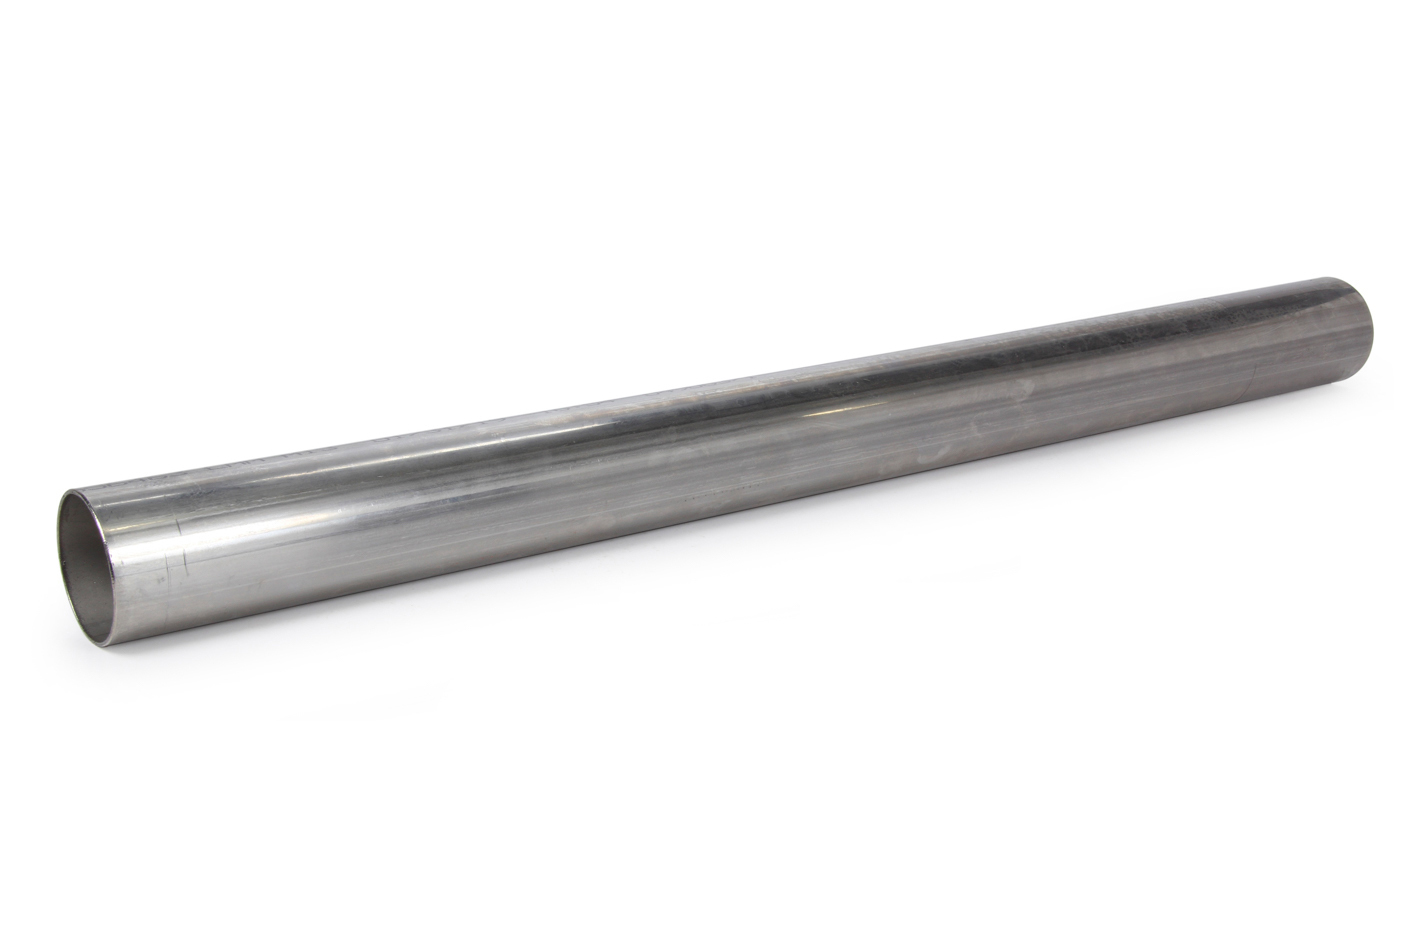 Stainless Works 1.6SS-2 Exhaust Pipe, Straight, 1-5/8 in Diameter, 24 in Long, 0.065 Wall, Stainless, Natural, Each